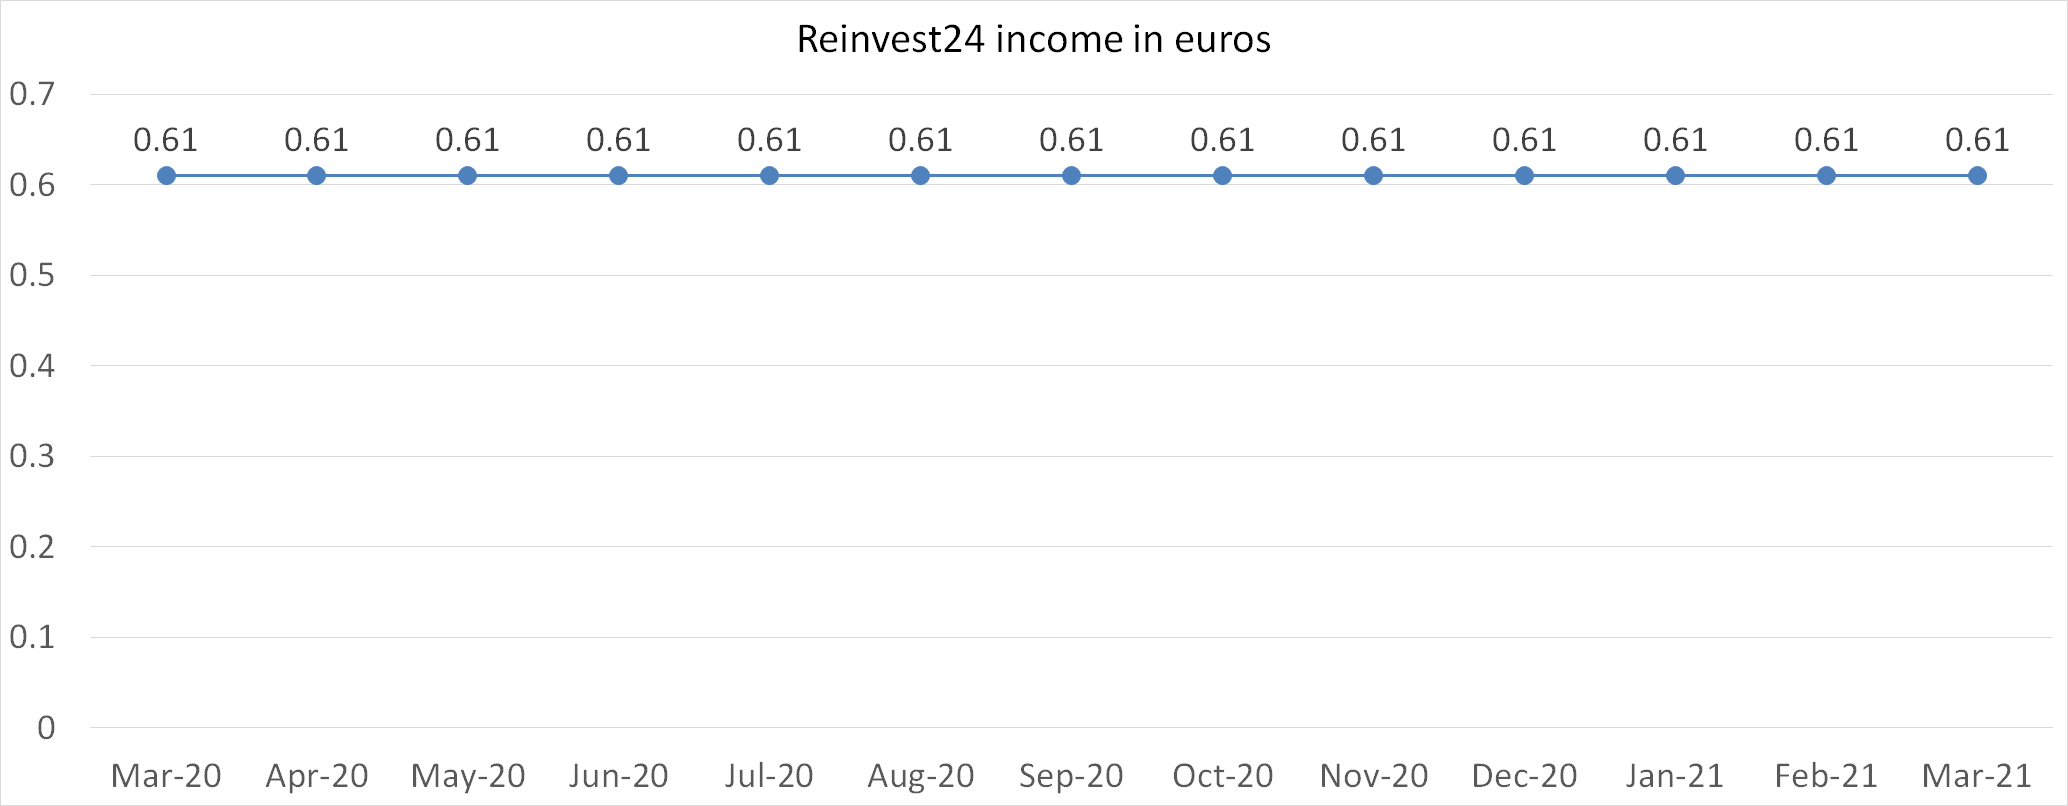 Reinvest24 income in euros march 2021